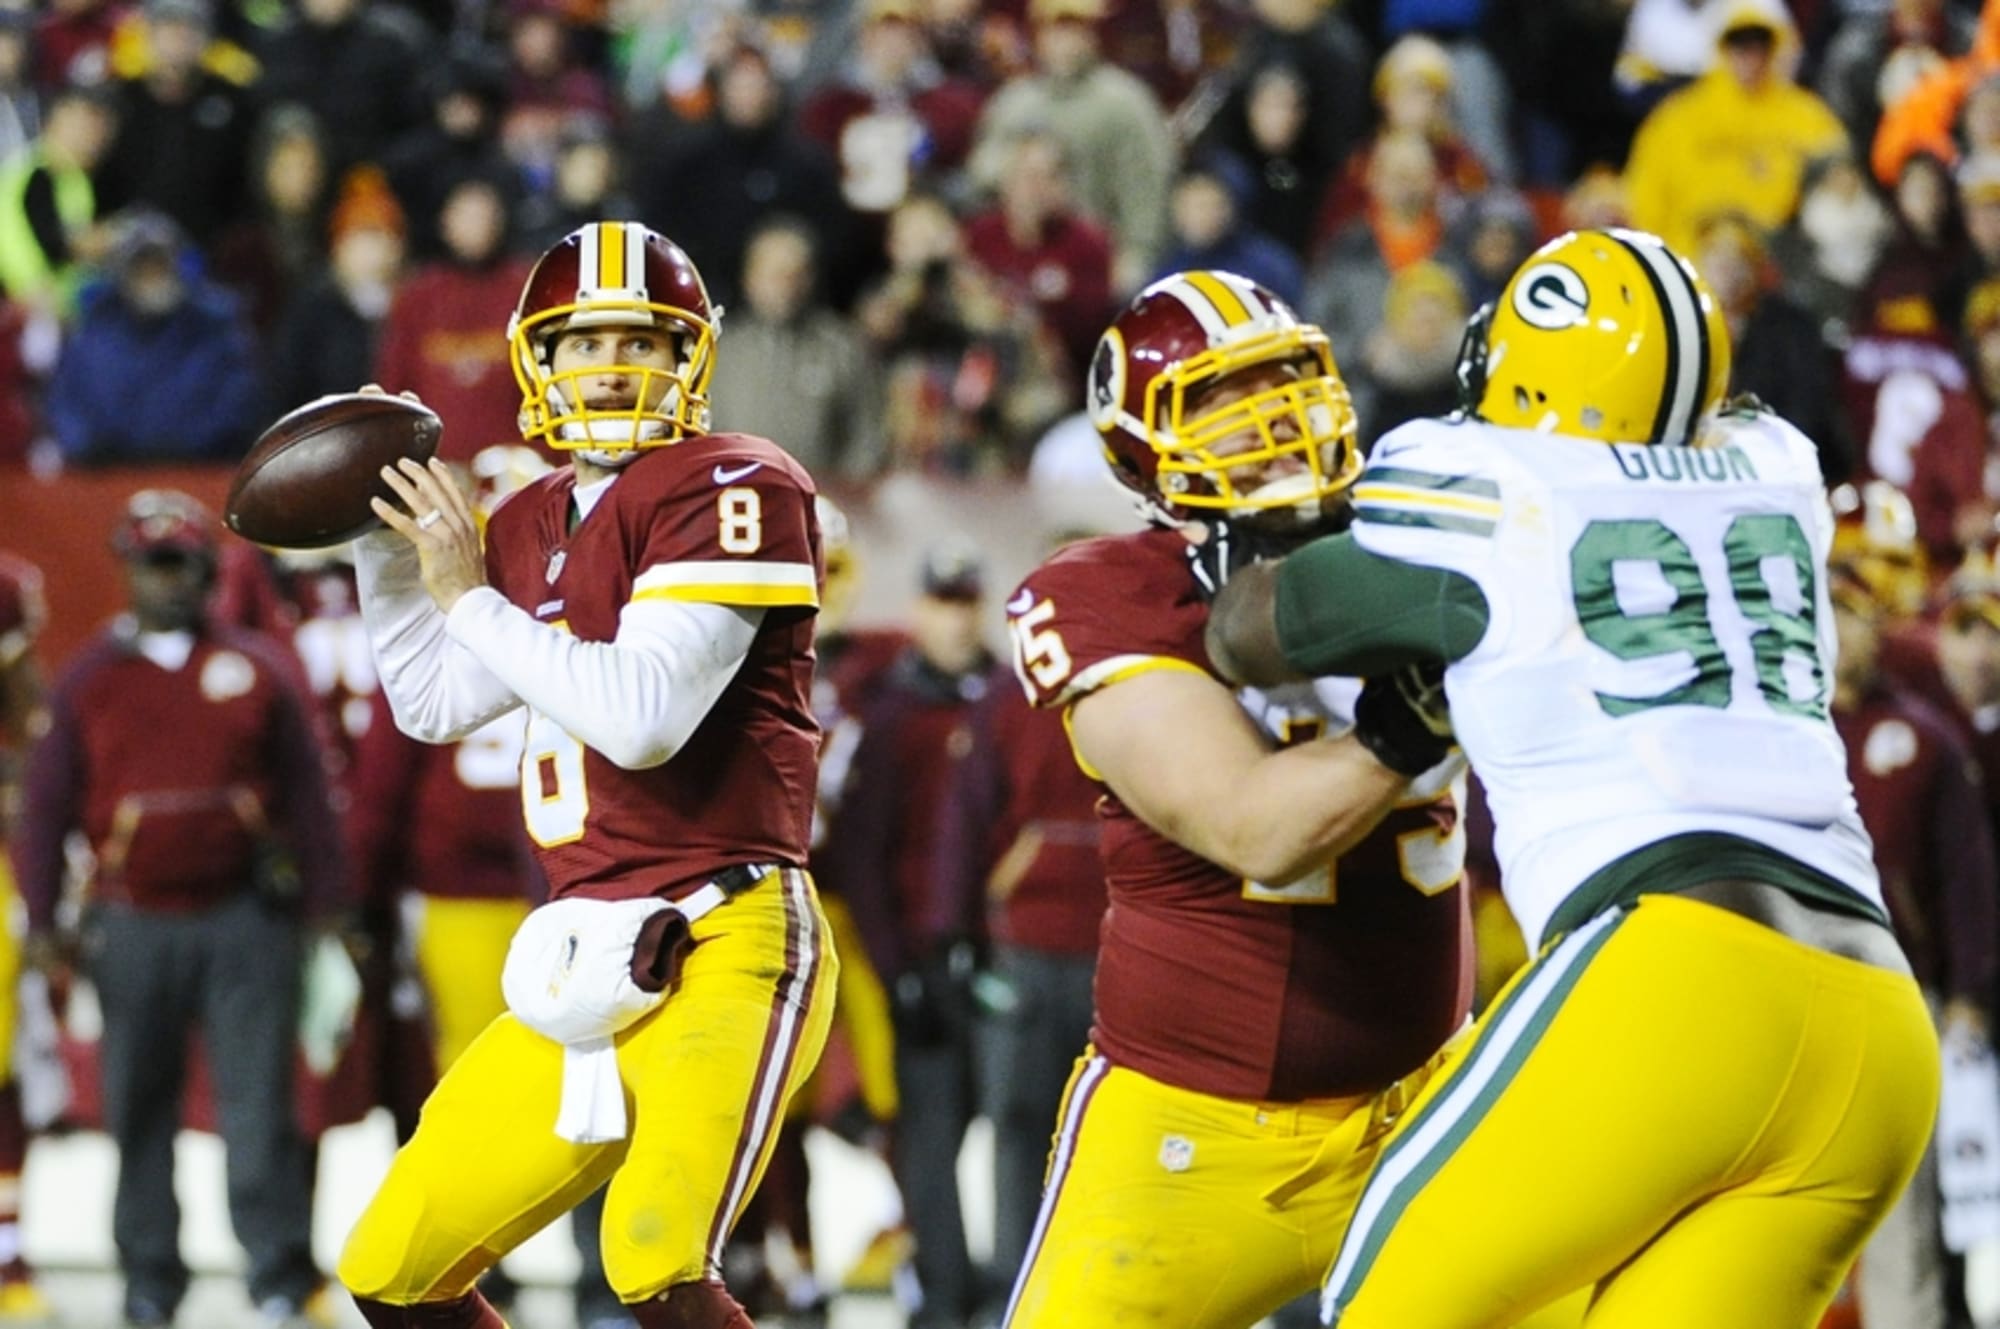 Redskins want to sign Kirk Cousins to long-term deal